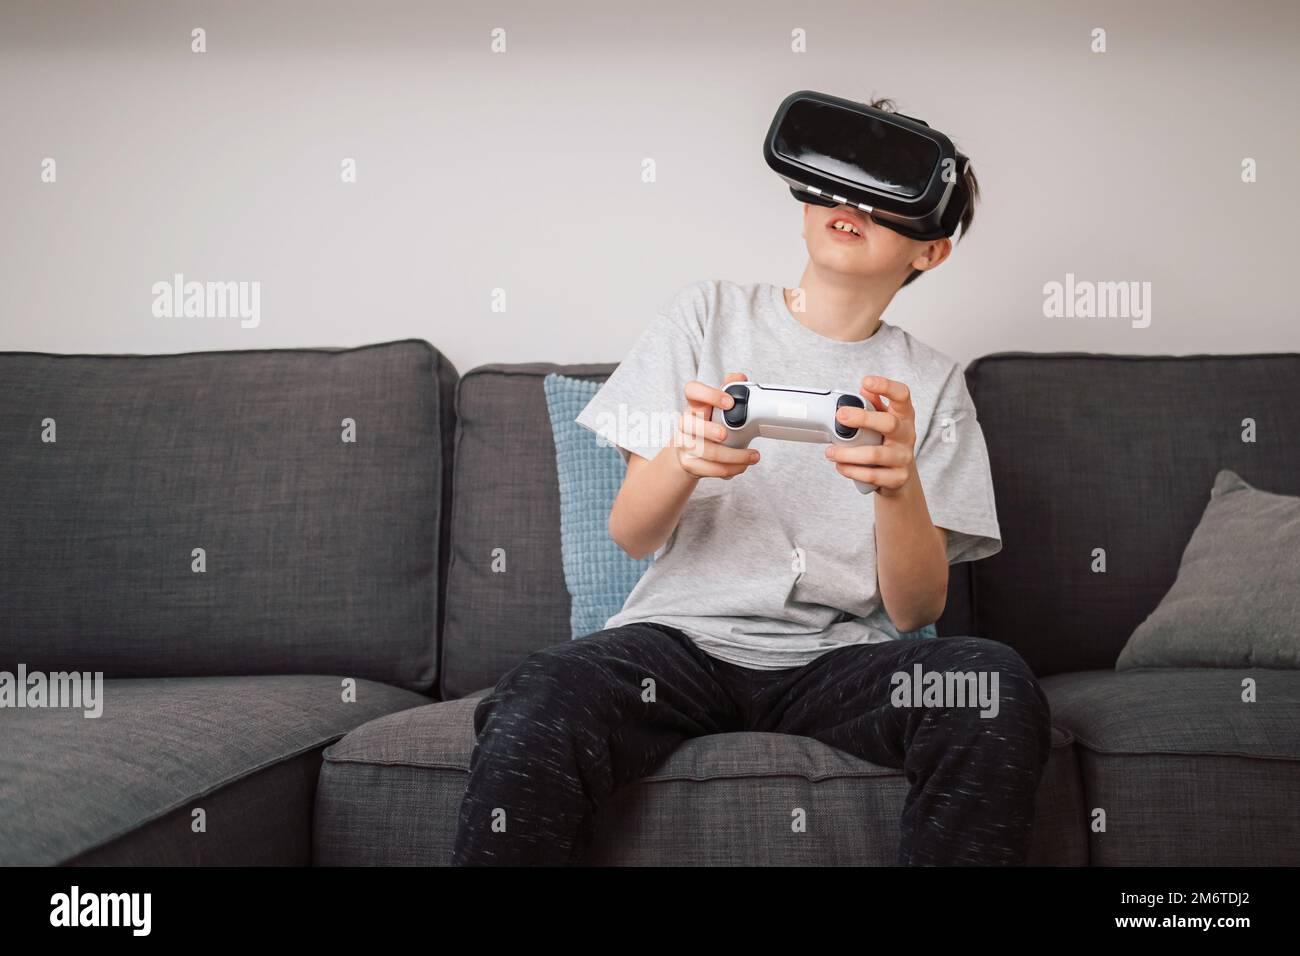 Boy having fun playing simulation games, using virtual reality headset and controller. Children and modern technology concept. Stock Photo